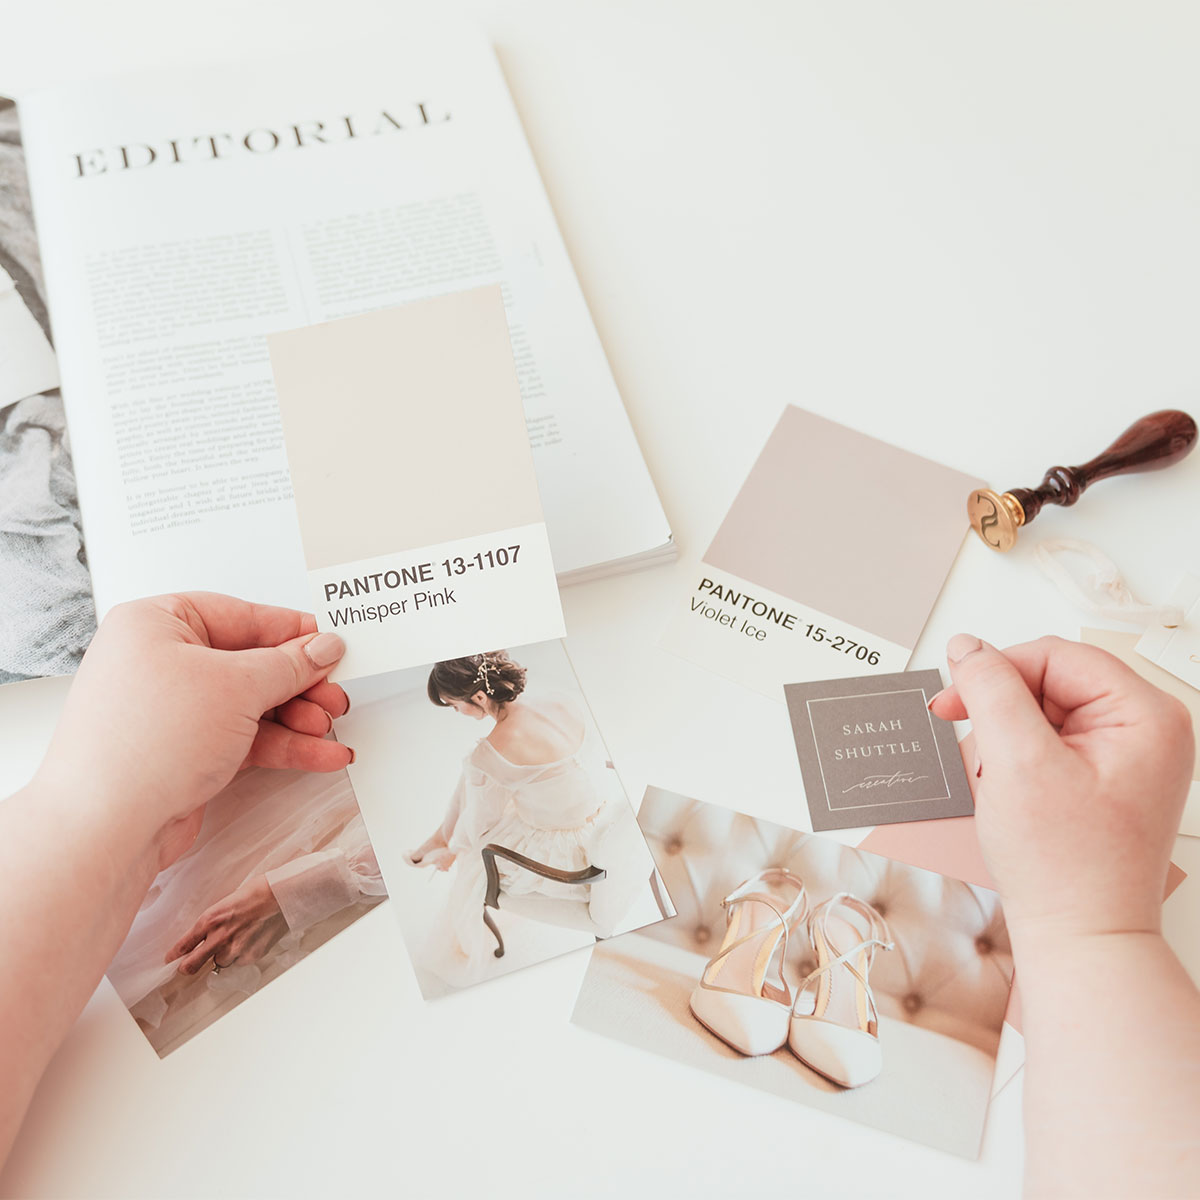 Mood board with pantone colour palette swatches, inspiration for feminine branding